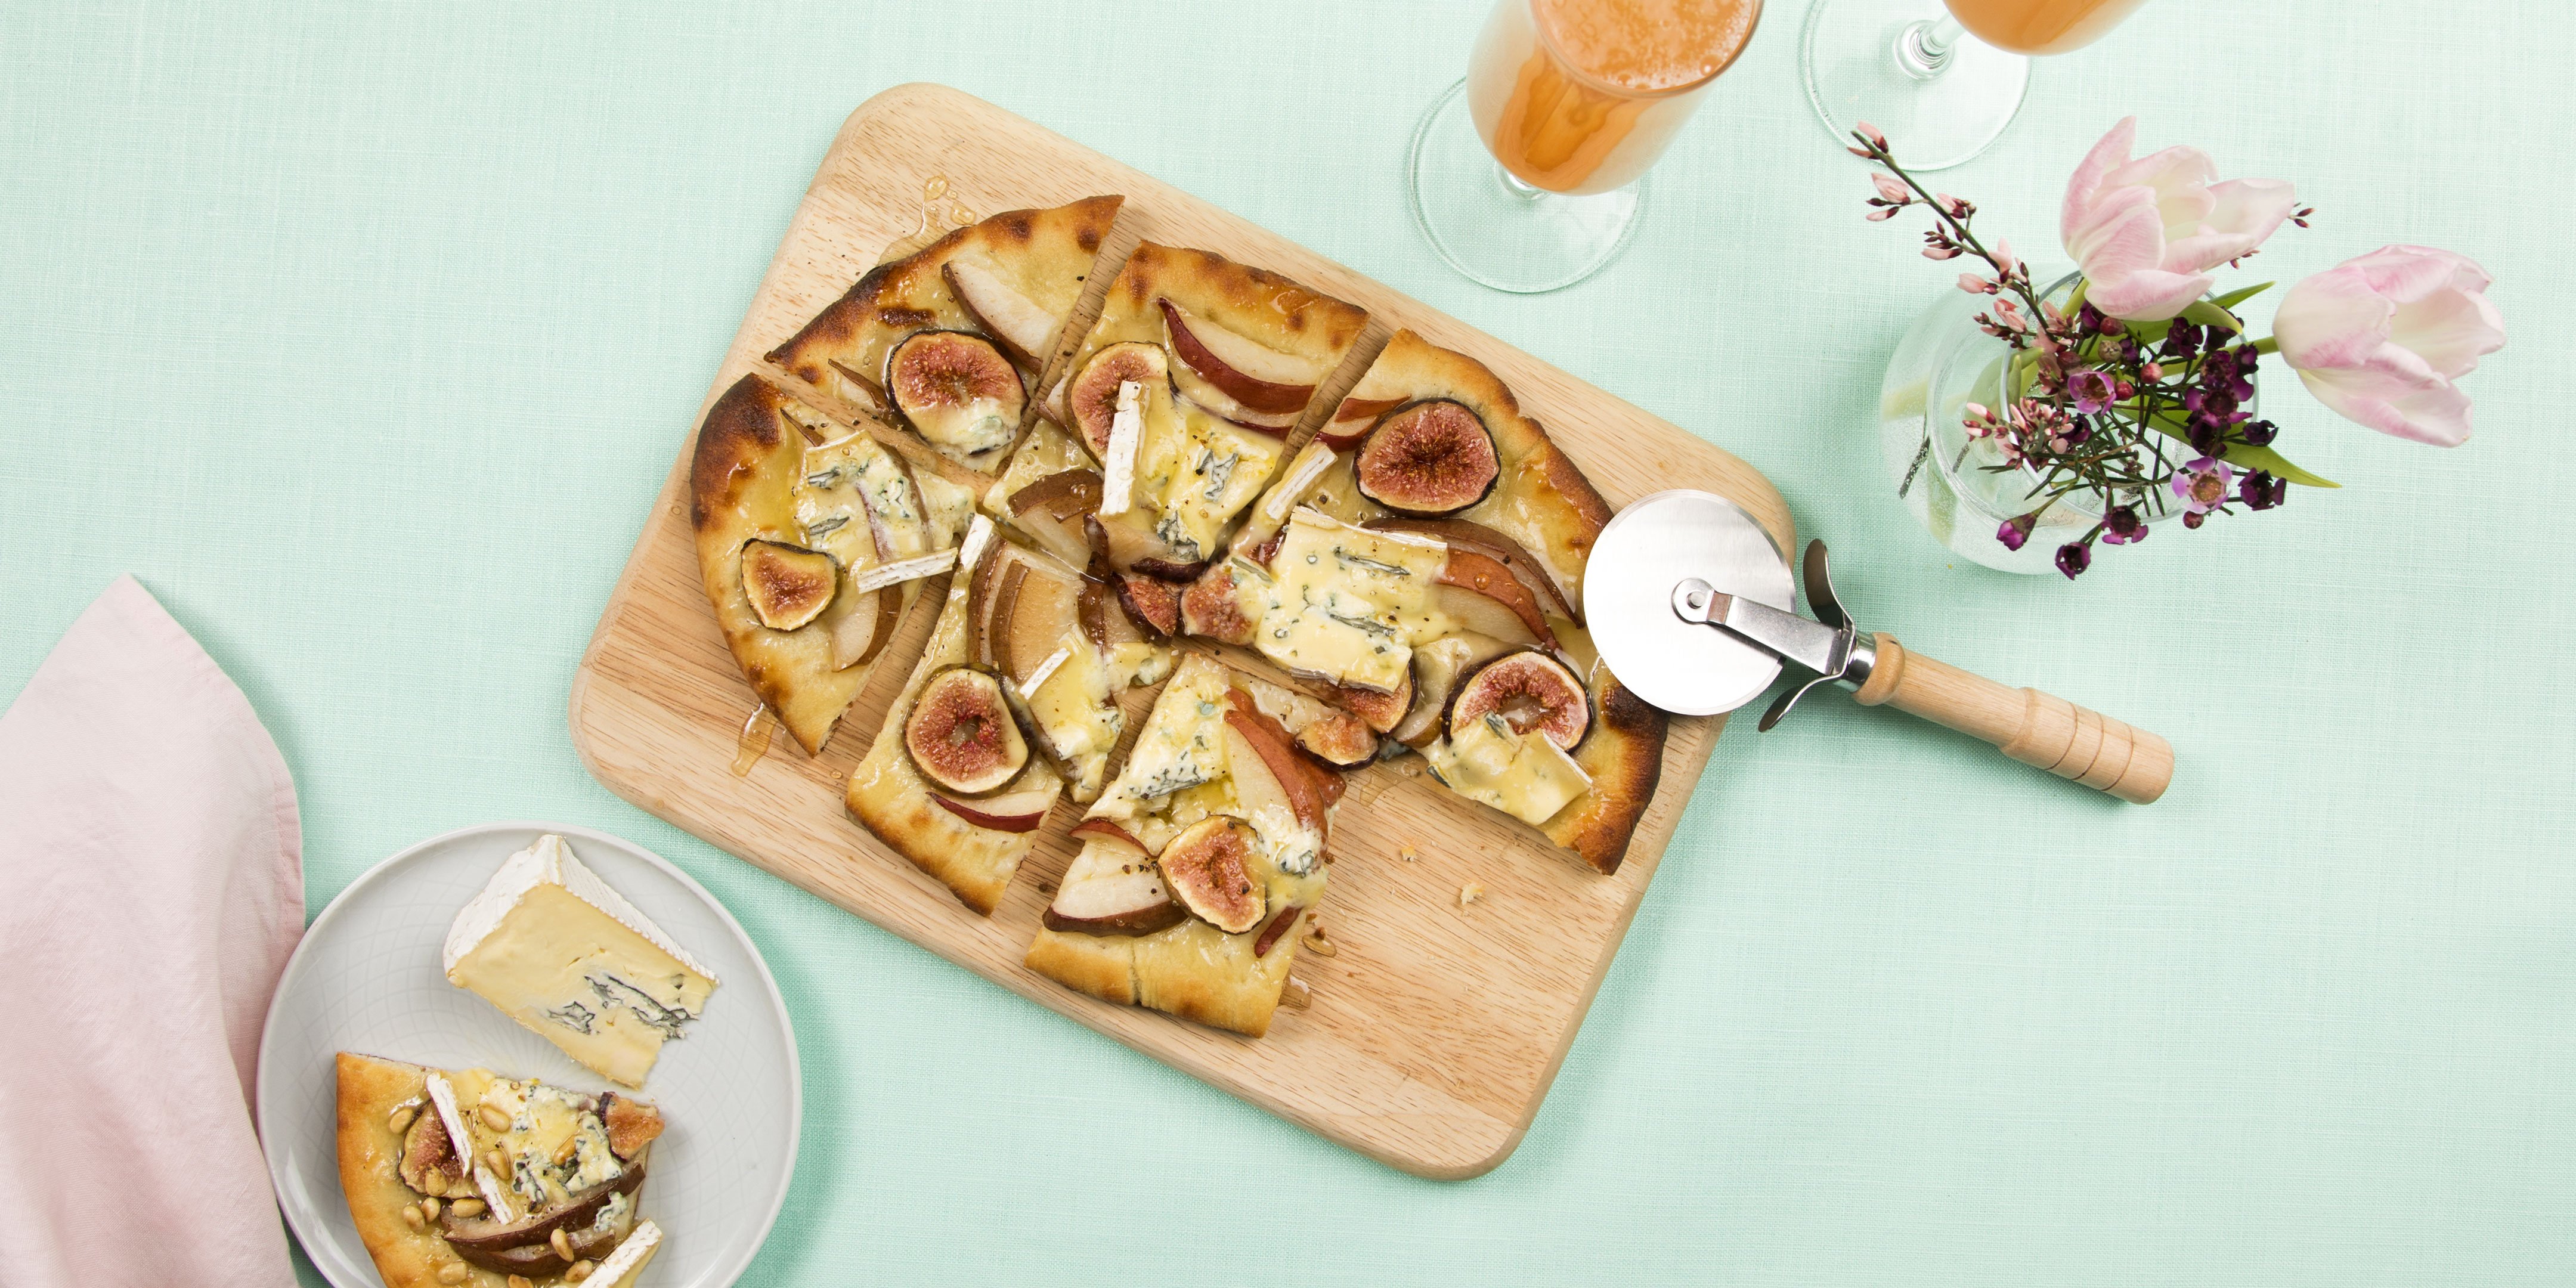 Recipe -  Flatbread with pears, figs and Cambozola cheese